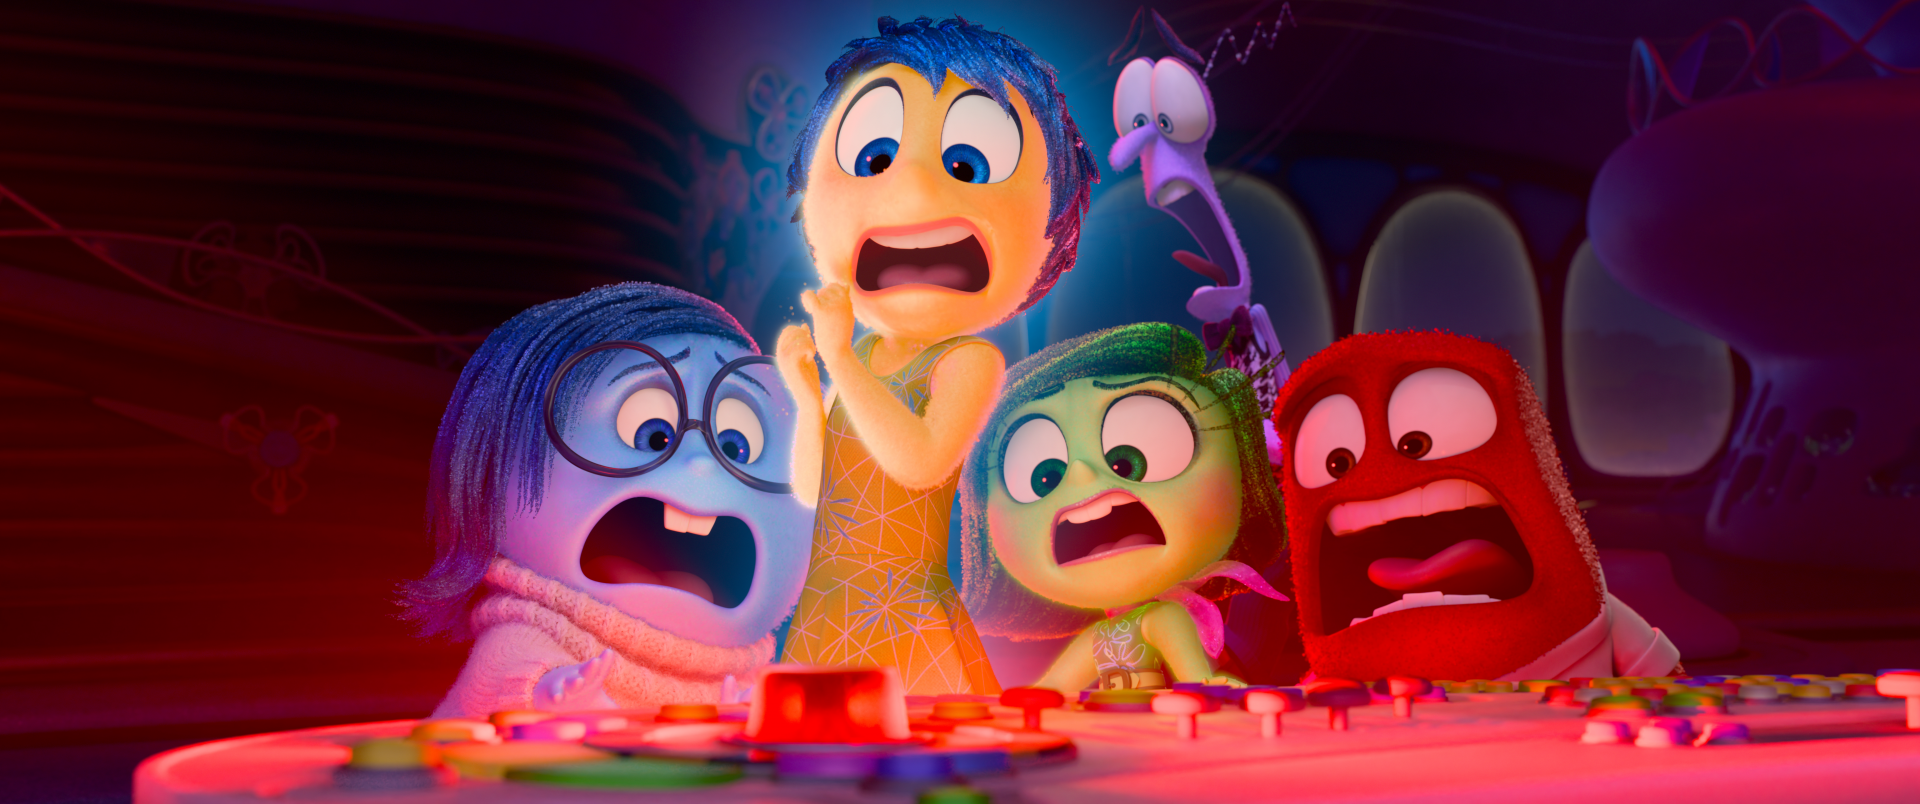 Inside Out 2 HD Wallpaper Emotional Characters Adventure